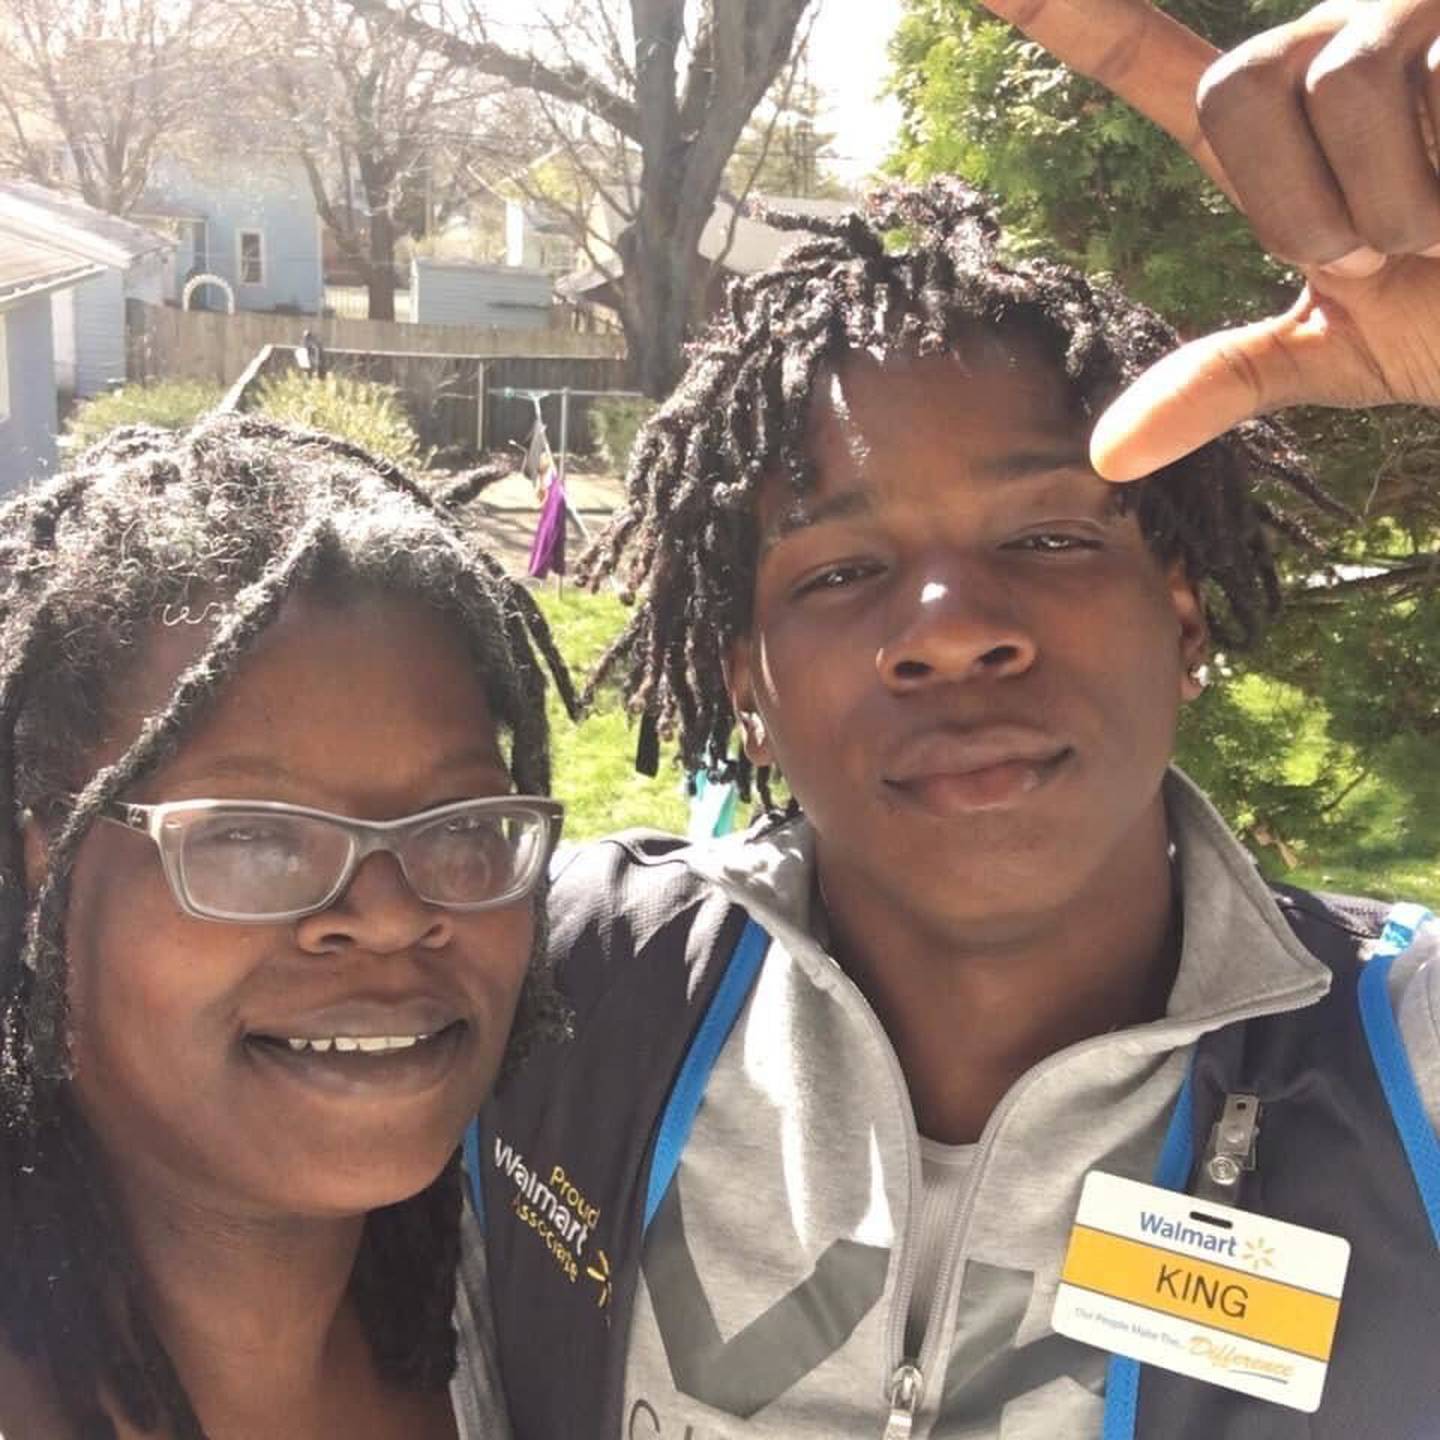 Tara McCarthy (left) and her son Marlon King Jr. (right) pose in this undated photo. A young Marlon King Jr. poses in this undated photo. King graduated from DeKalb High School in 2022. King was fatally shot May 11, 2023 in DeKalb. Two men, Jayden C. Hernandez and Carreon S. Scott, also of DeKalb, are charged with first-degree murder in his death.